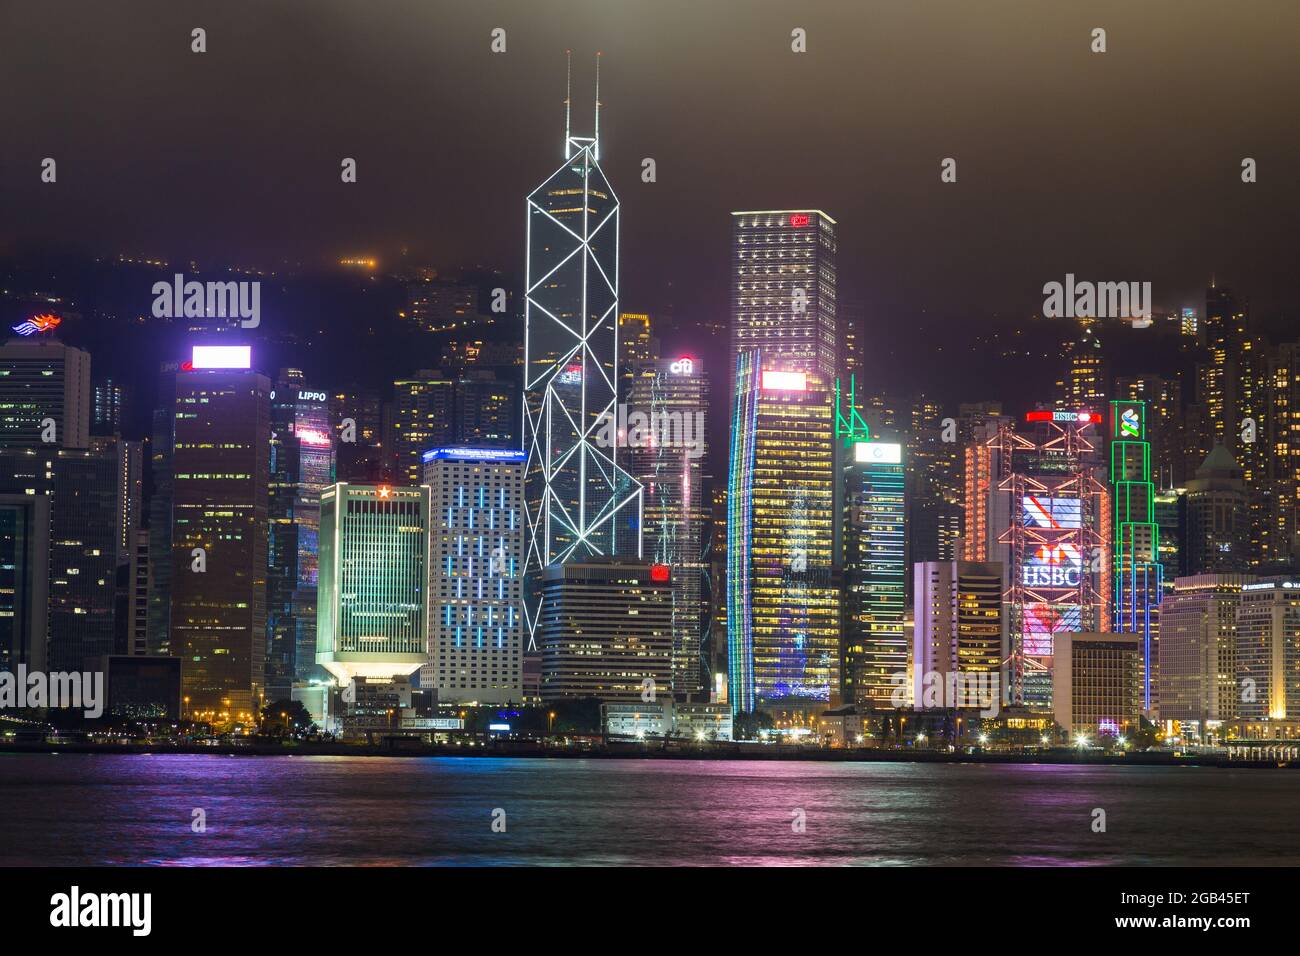 HONG KONG - 10TH APRIL 2017: Hong Kong Island skyline at night with views across Victoria Habour. Skyscrapers and office buildings can be seen. Stock Photo